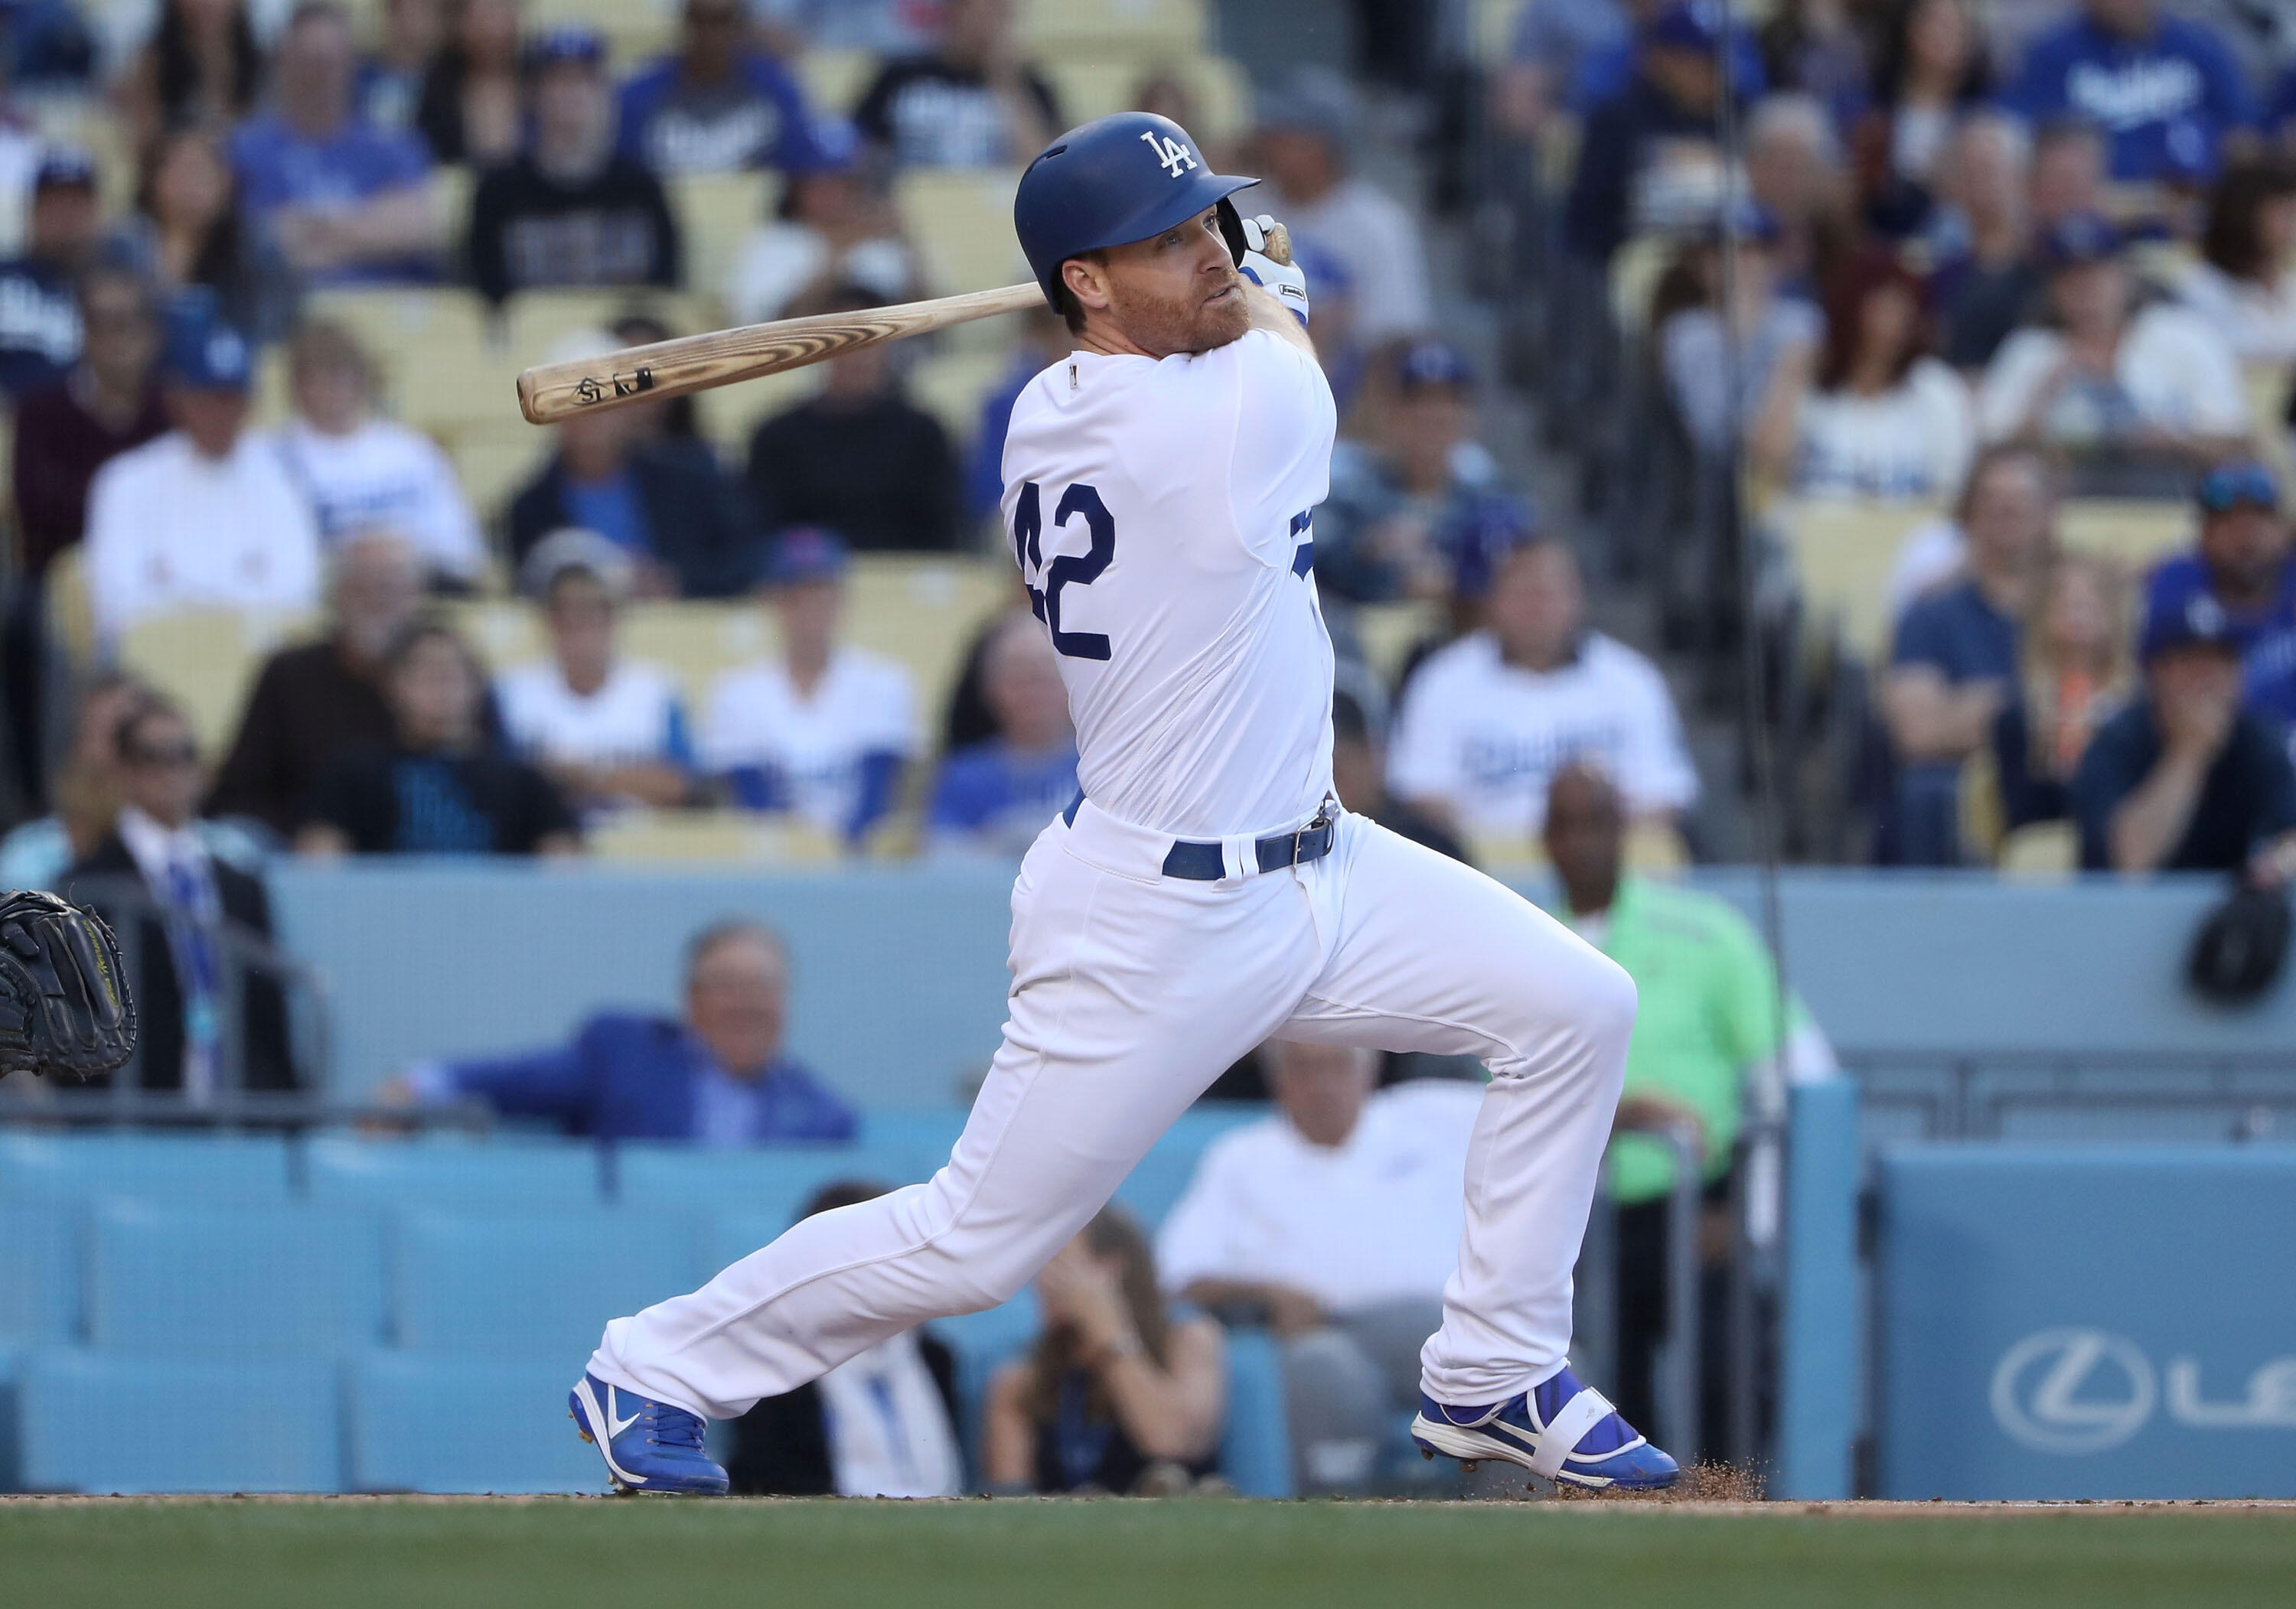 LOS ANGELES, CA - APRIL 15: Logan Forsythe #11 of the Los Angeles Dodgers doubles to deep right field in the first inning during the MLB game against the Arizona Diamondbacks at Dodger Stadium on April 15, 2017 in Los Angeles, California.  All players are